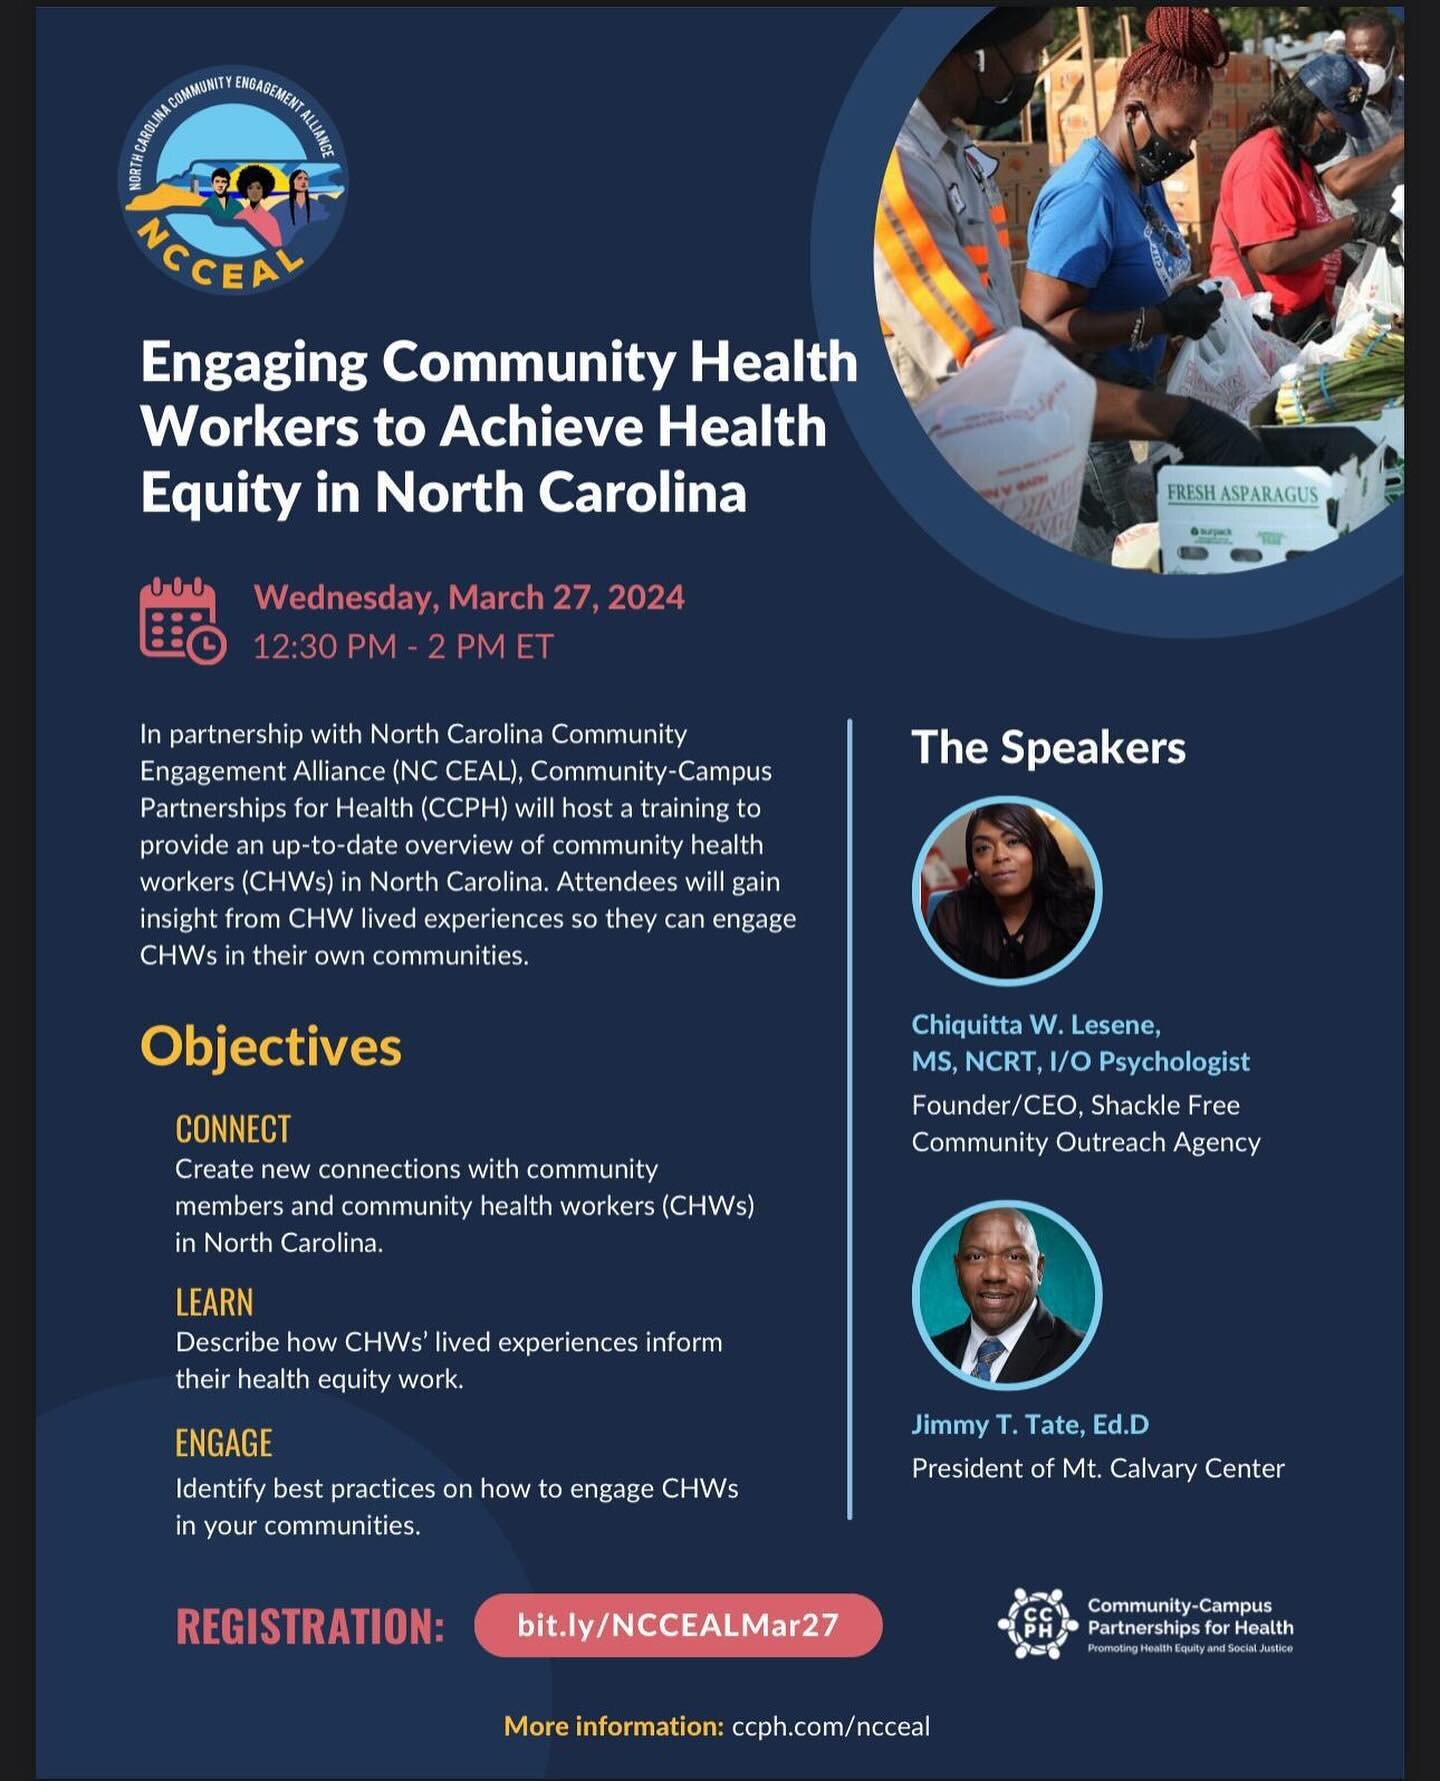 ✊🏽Join the movement for health equity: Engage with North Carolina&rsquo;s community health workers in a transformative workshop on March 27, 2024, featuring expert insights from Chiquitta W. Lesene and Jimmy T. Tate, Ed.D. Connect, learn, and engage